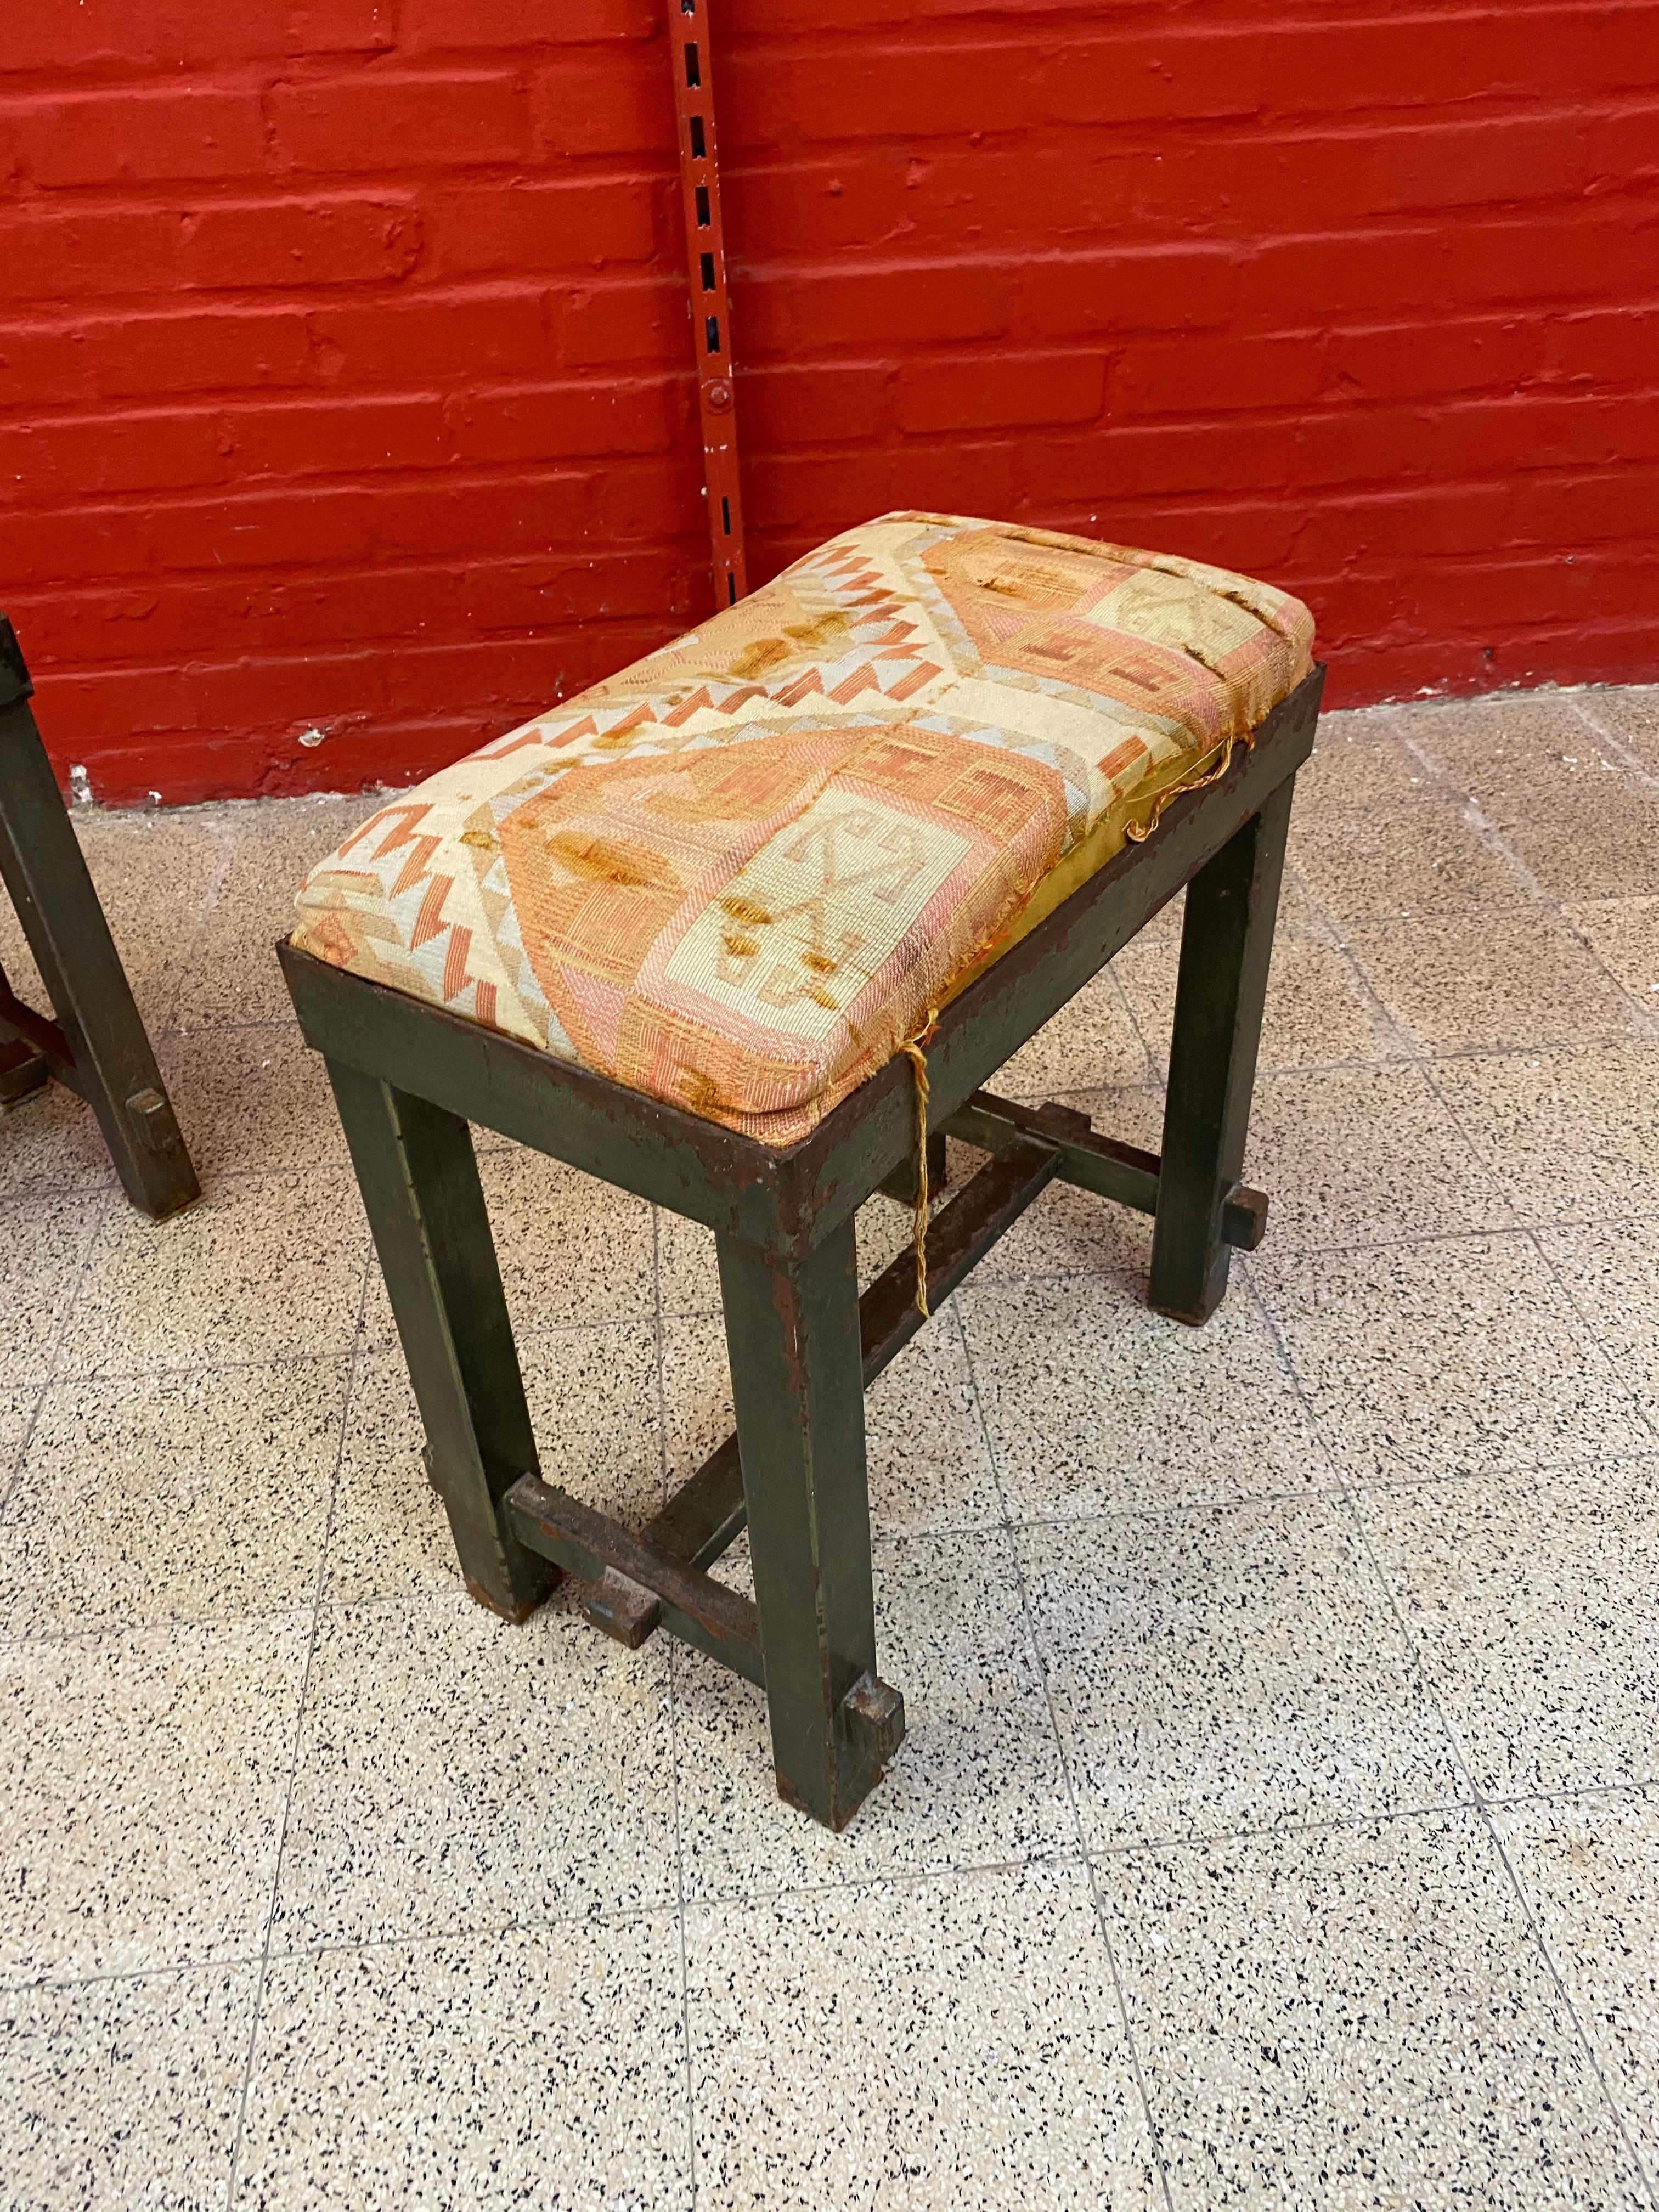 2 stools in lacquered metal, in the style of Jacques Adnet circa 1940/1950.
many gaps and wear to the lacquer. 
1 table, a sideboard and 6 chairs are also available and presented in other advertisements.